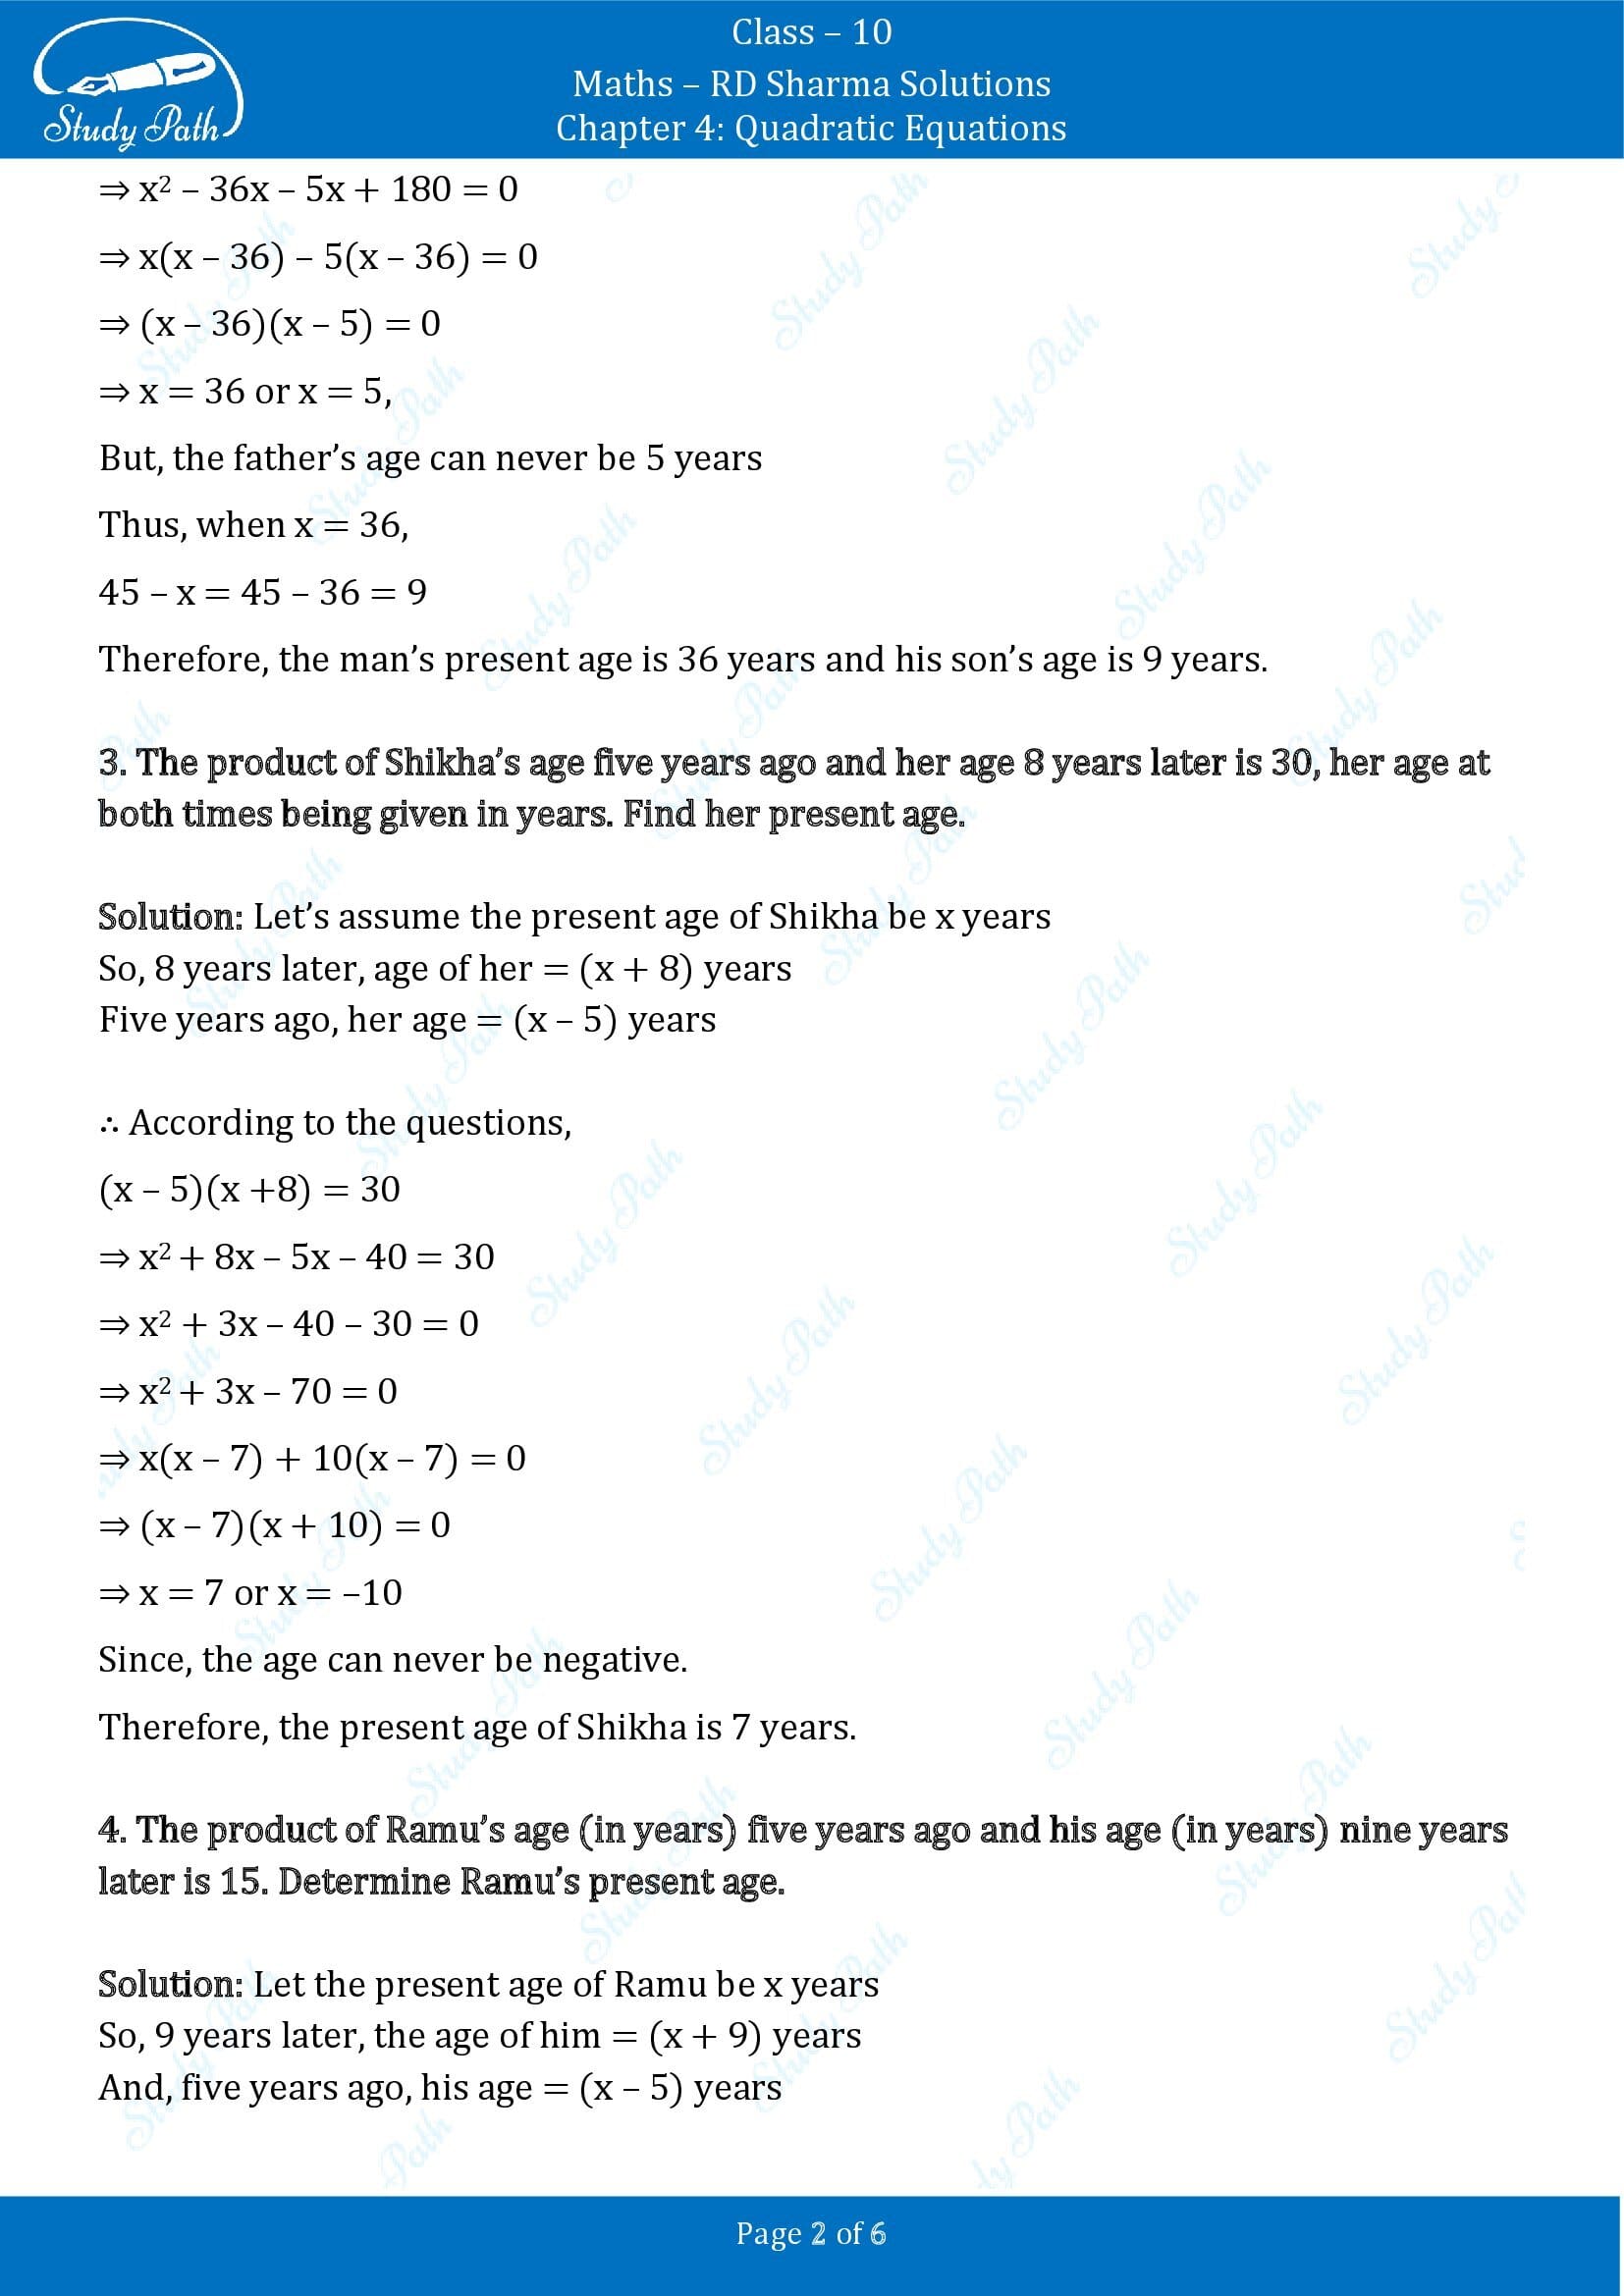 RD Sharma Solutions Class 10 Chapter 4 Quadratic Equations Exercise 4.9 00002